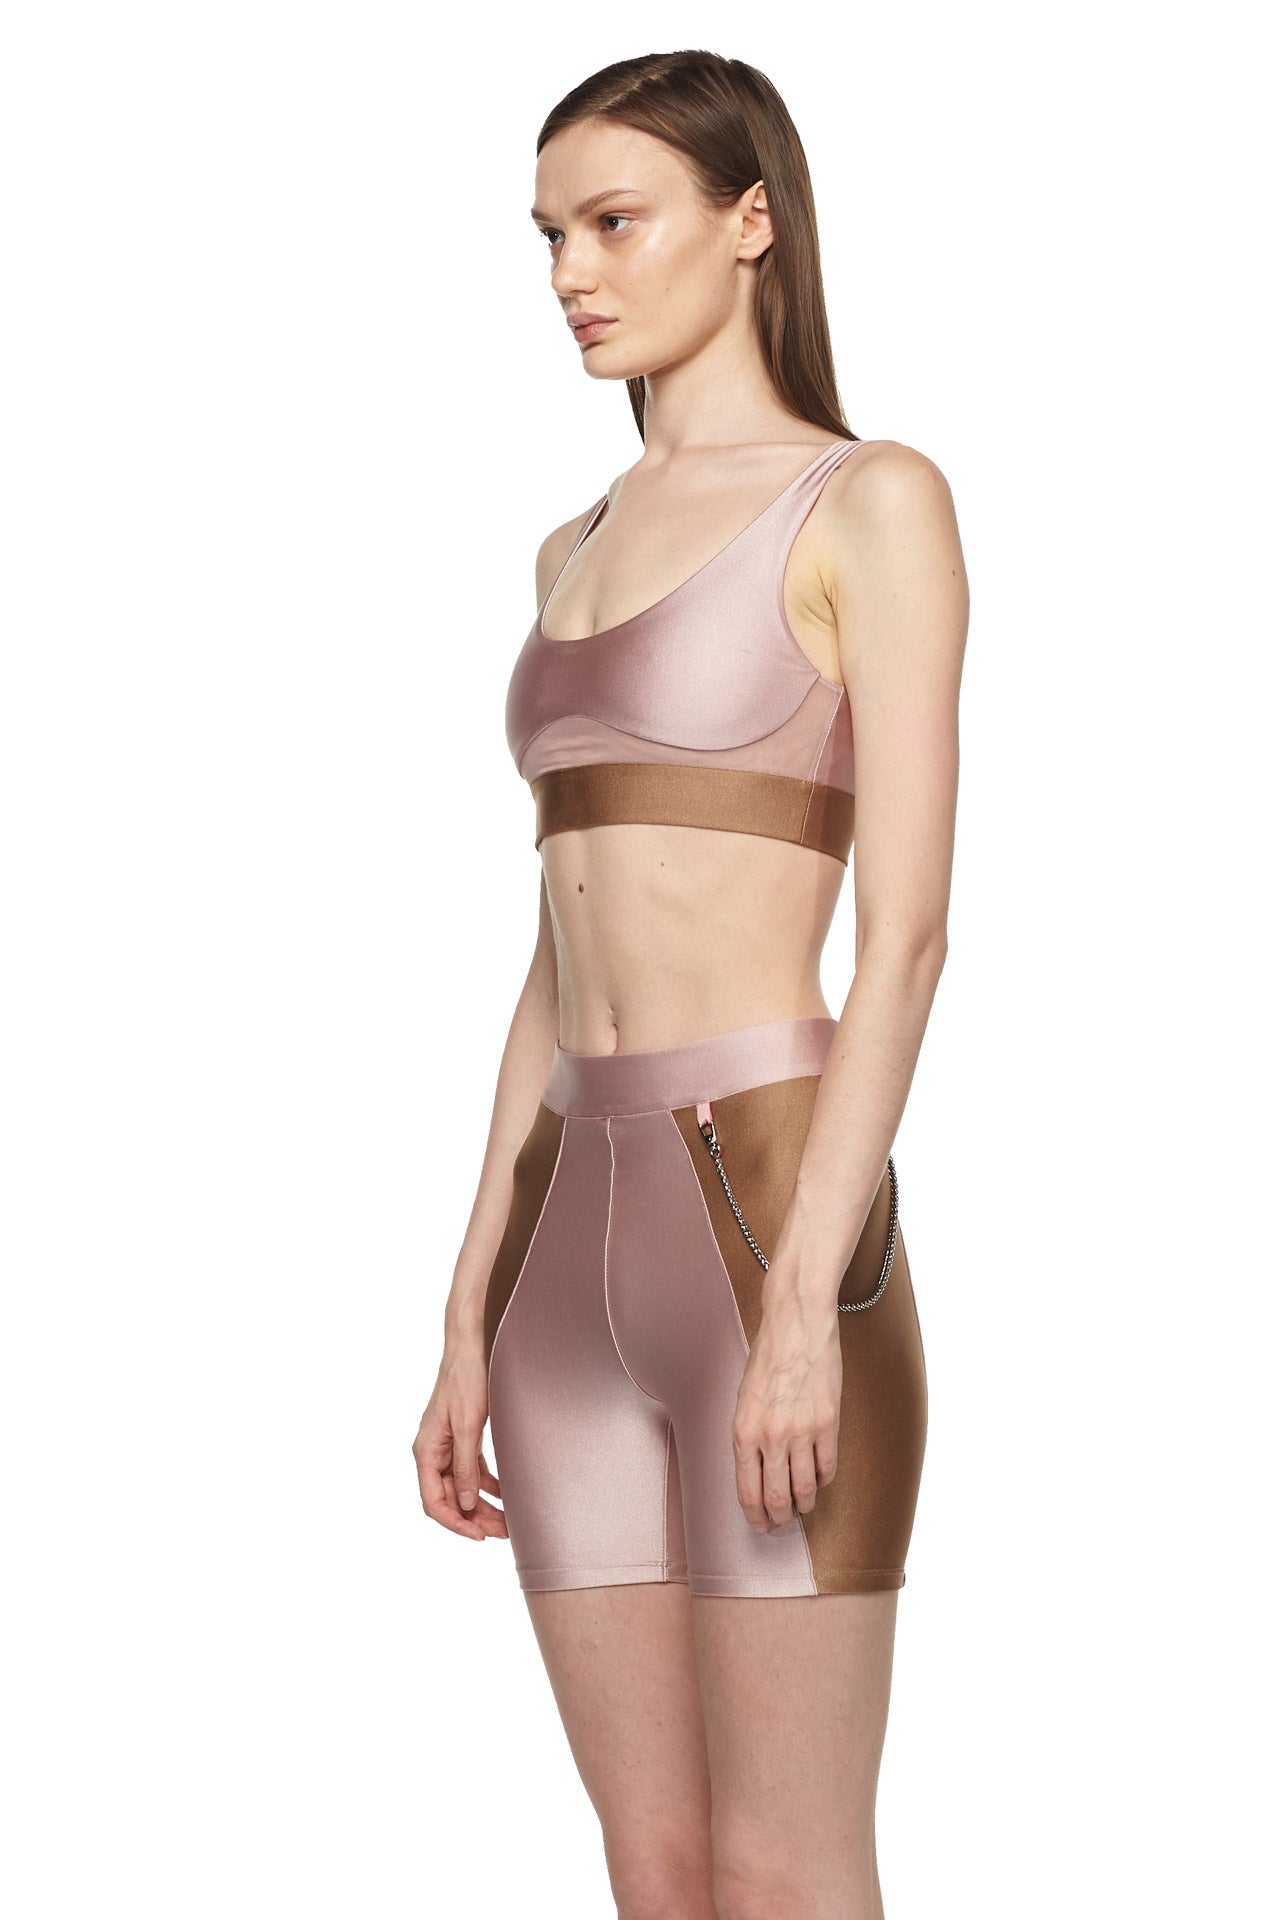 Rose Sable Sports Bra with Low Back and Corset - New York Pilates